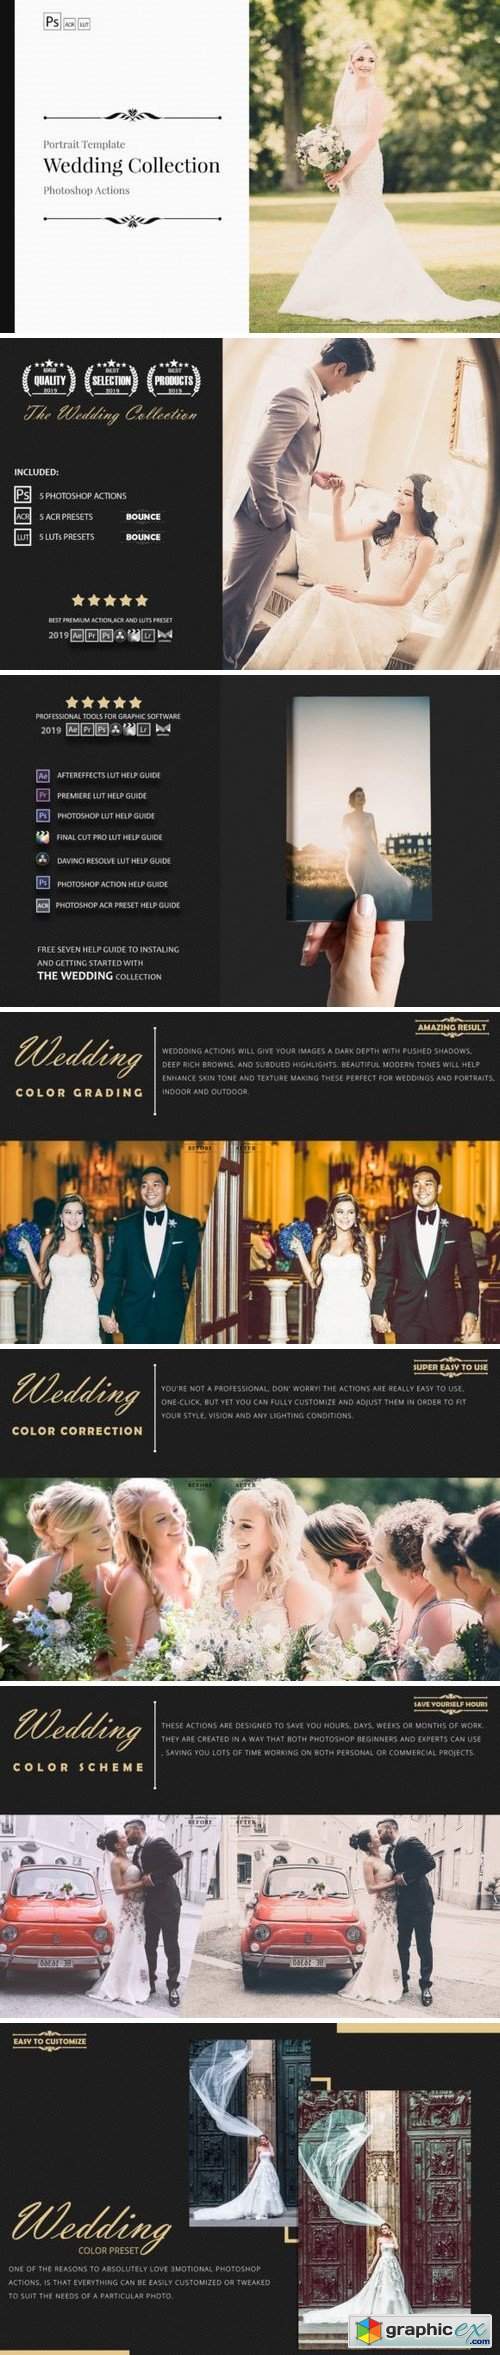 Neo Wedding Color Grading photoshop actions